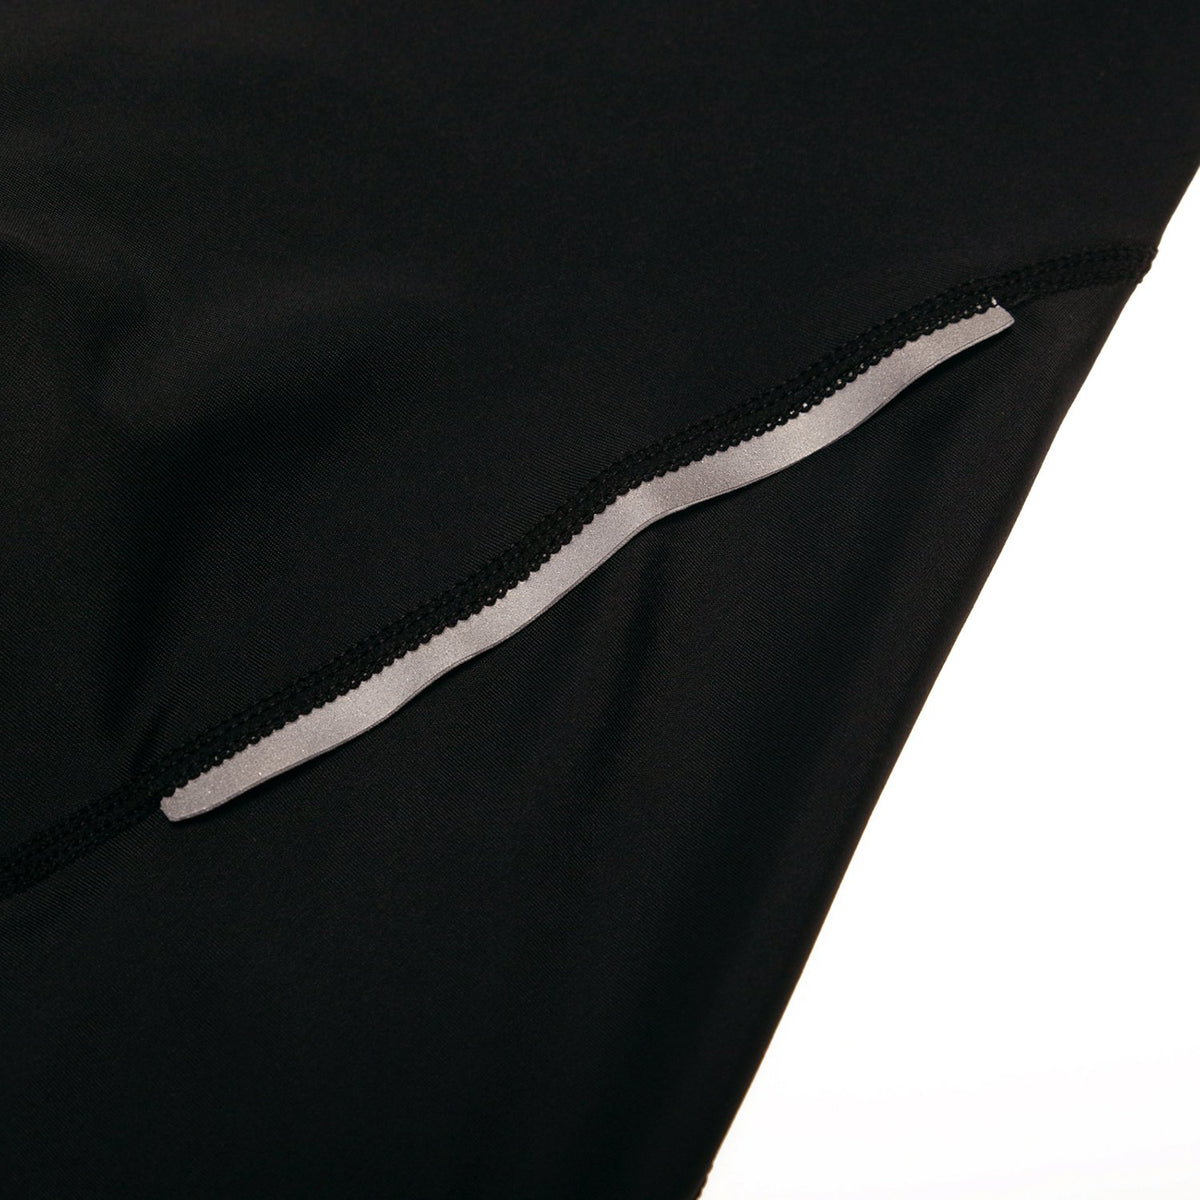 Women's Black Cycling Shorts with Reflective Strips